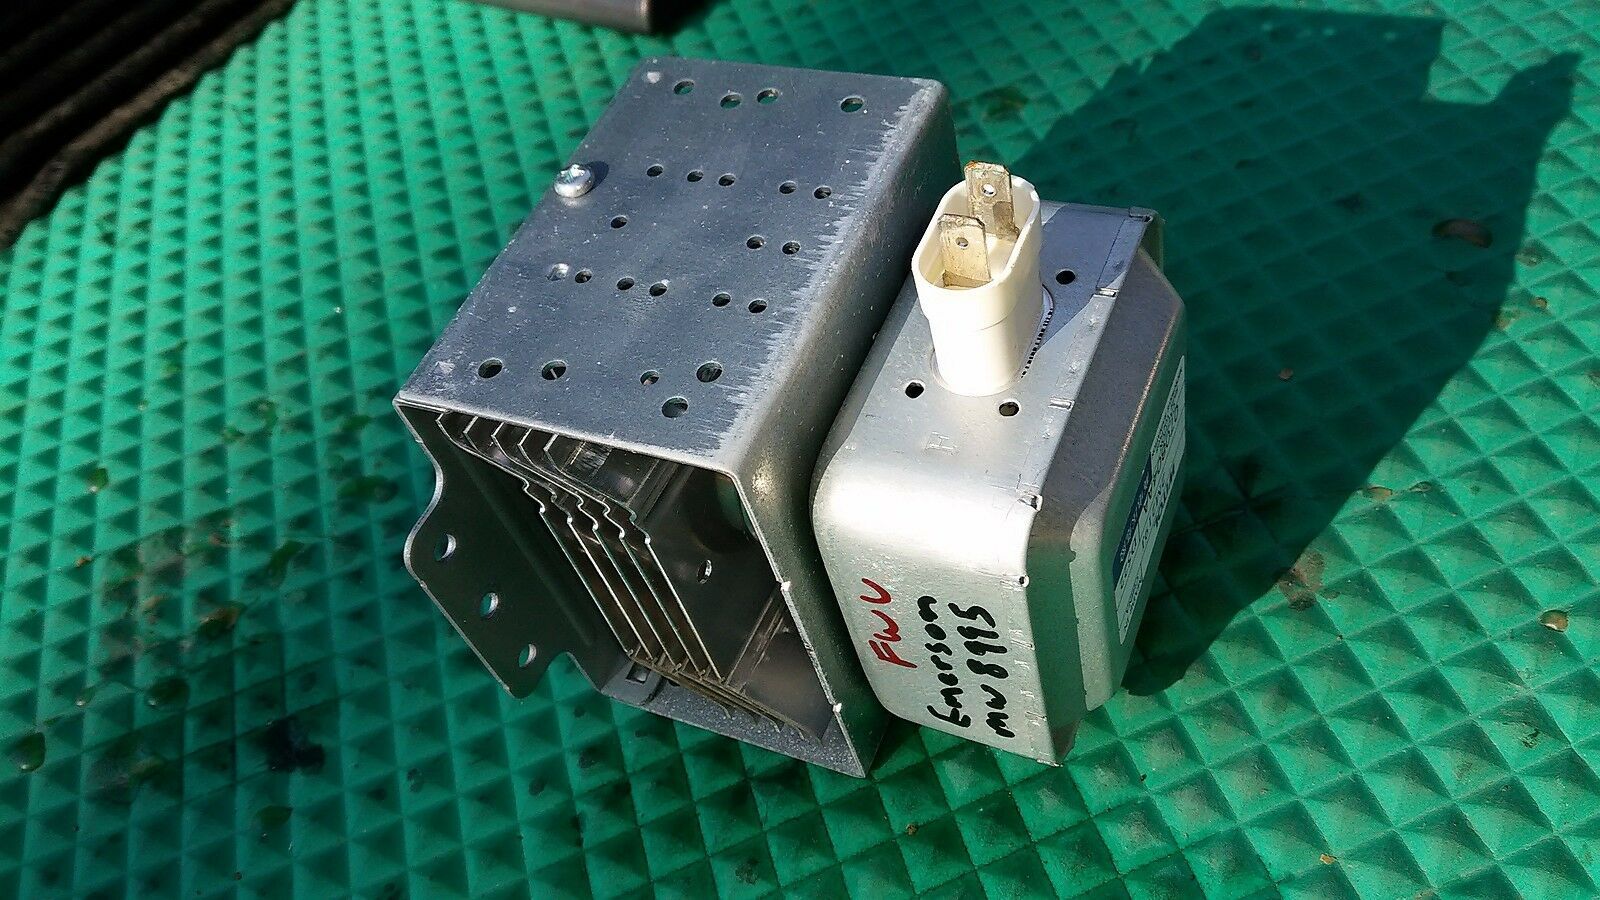 6RR48 MAGNETRON WITOL 2M219J, FROM EMERSON MW8995 MICROWAVE OVEN, 0.4 OHMS, VGC - $24.30